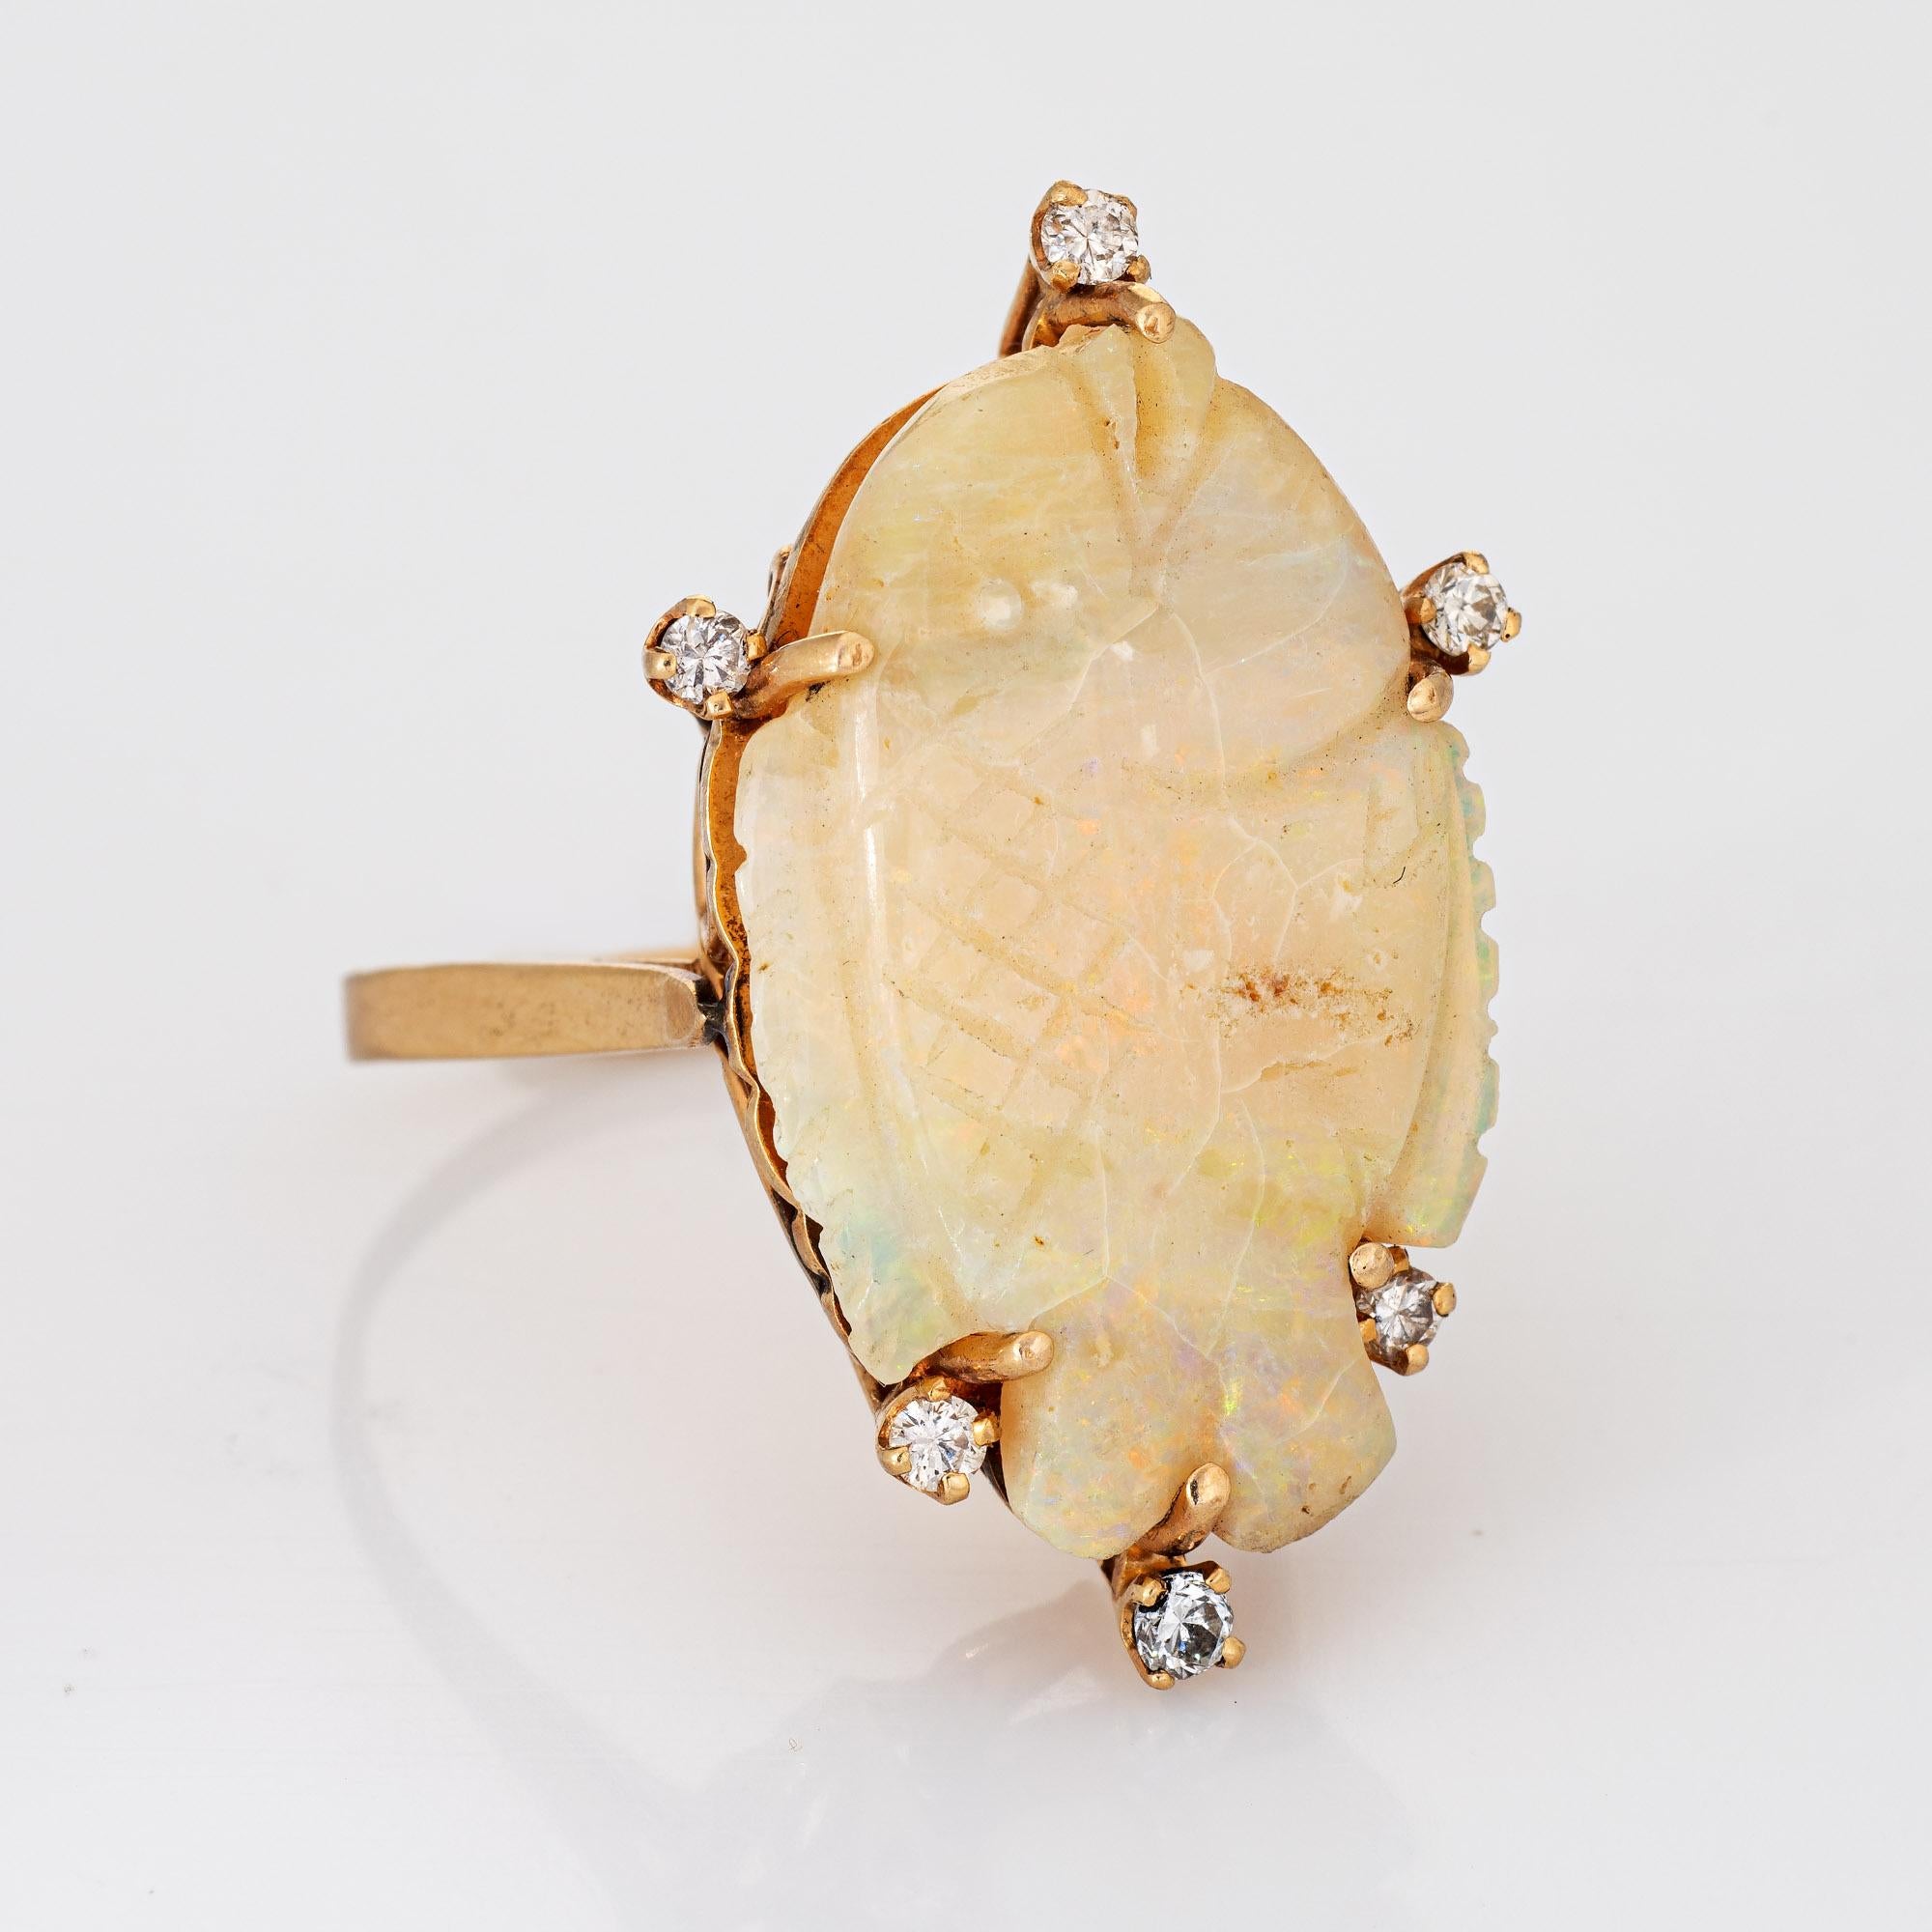 Distinct & unique carved opal fish ring crafted in 14 karat yellow gold (circa 1960s to 1970s). 

The carved opal measures 27mm x 18mm, accented with 6 estimated 0.02 carat round brilliant cut diamonds. The total diamond weight is estimated at 0.12